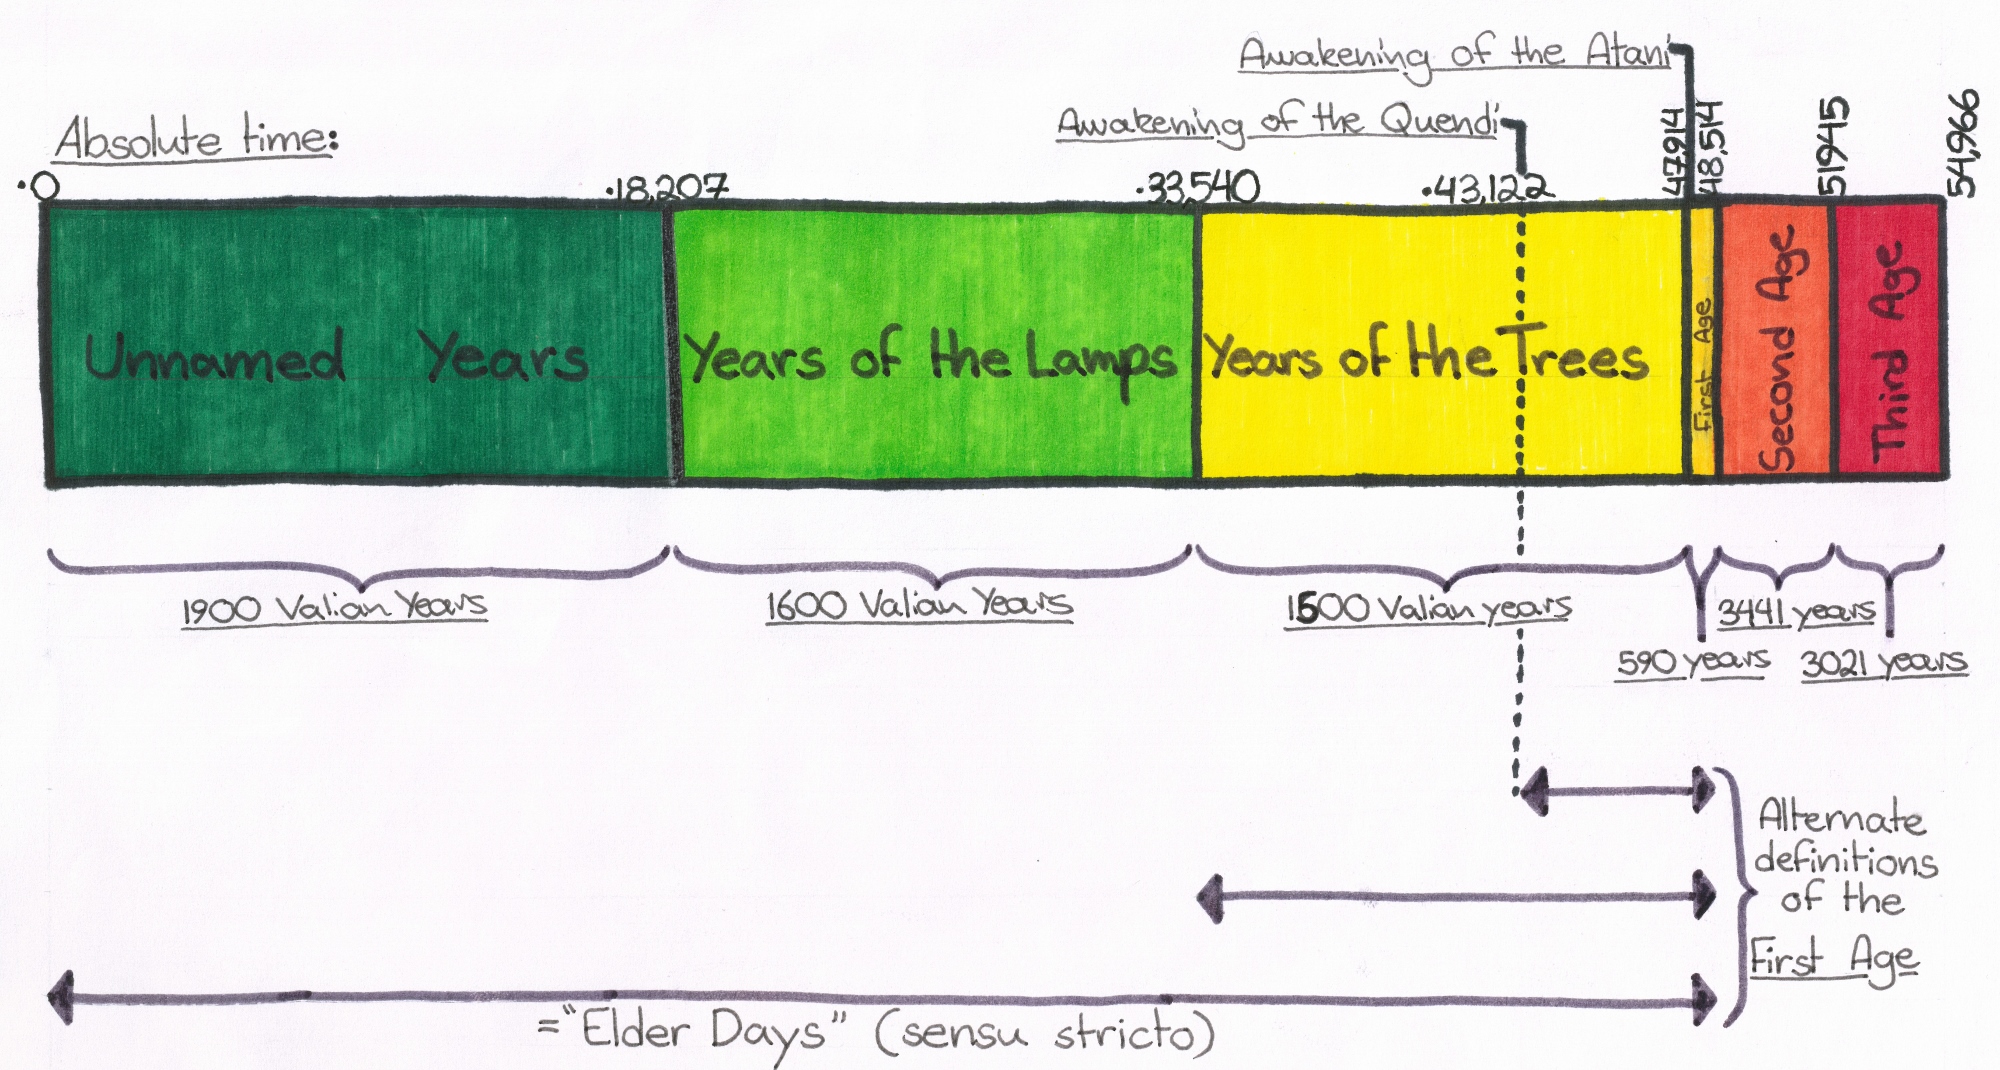 The Lord of the Rings timeline: A chronological trip through Middle-earth